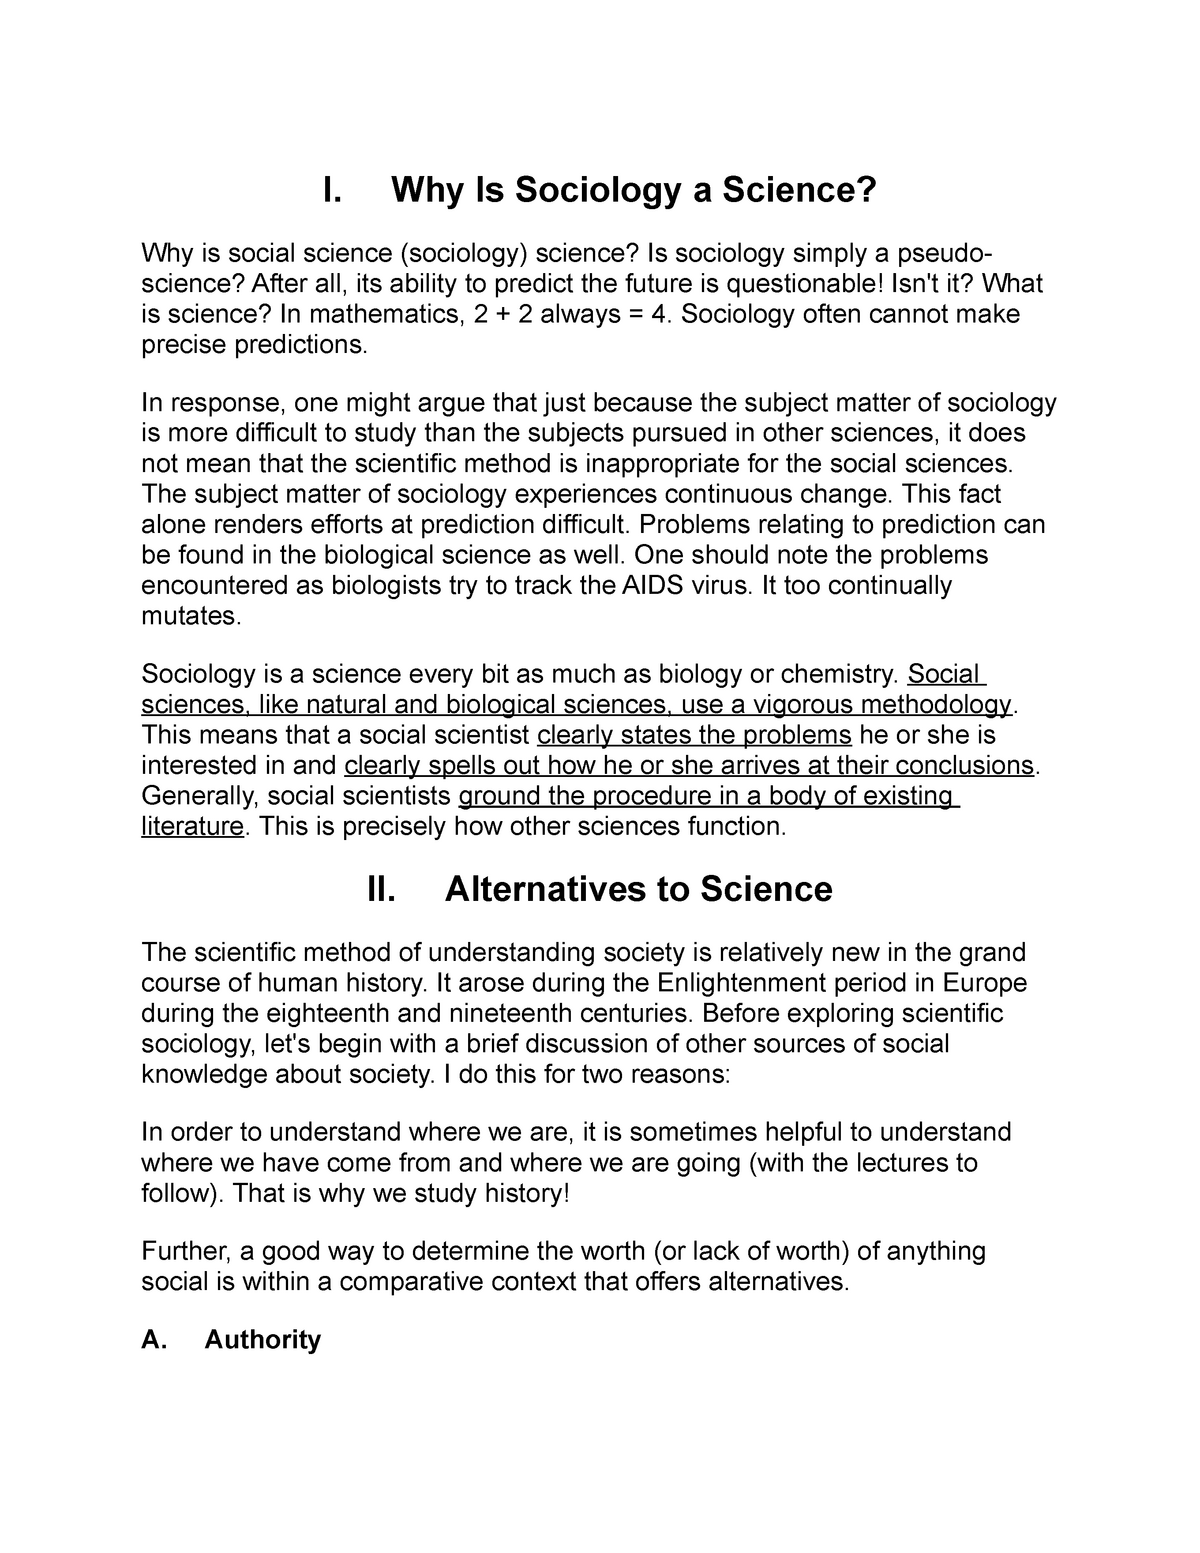 sociology is not a science essay